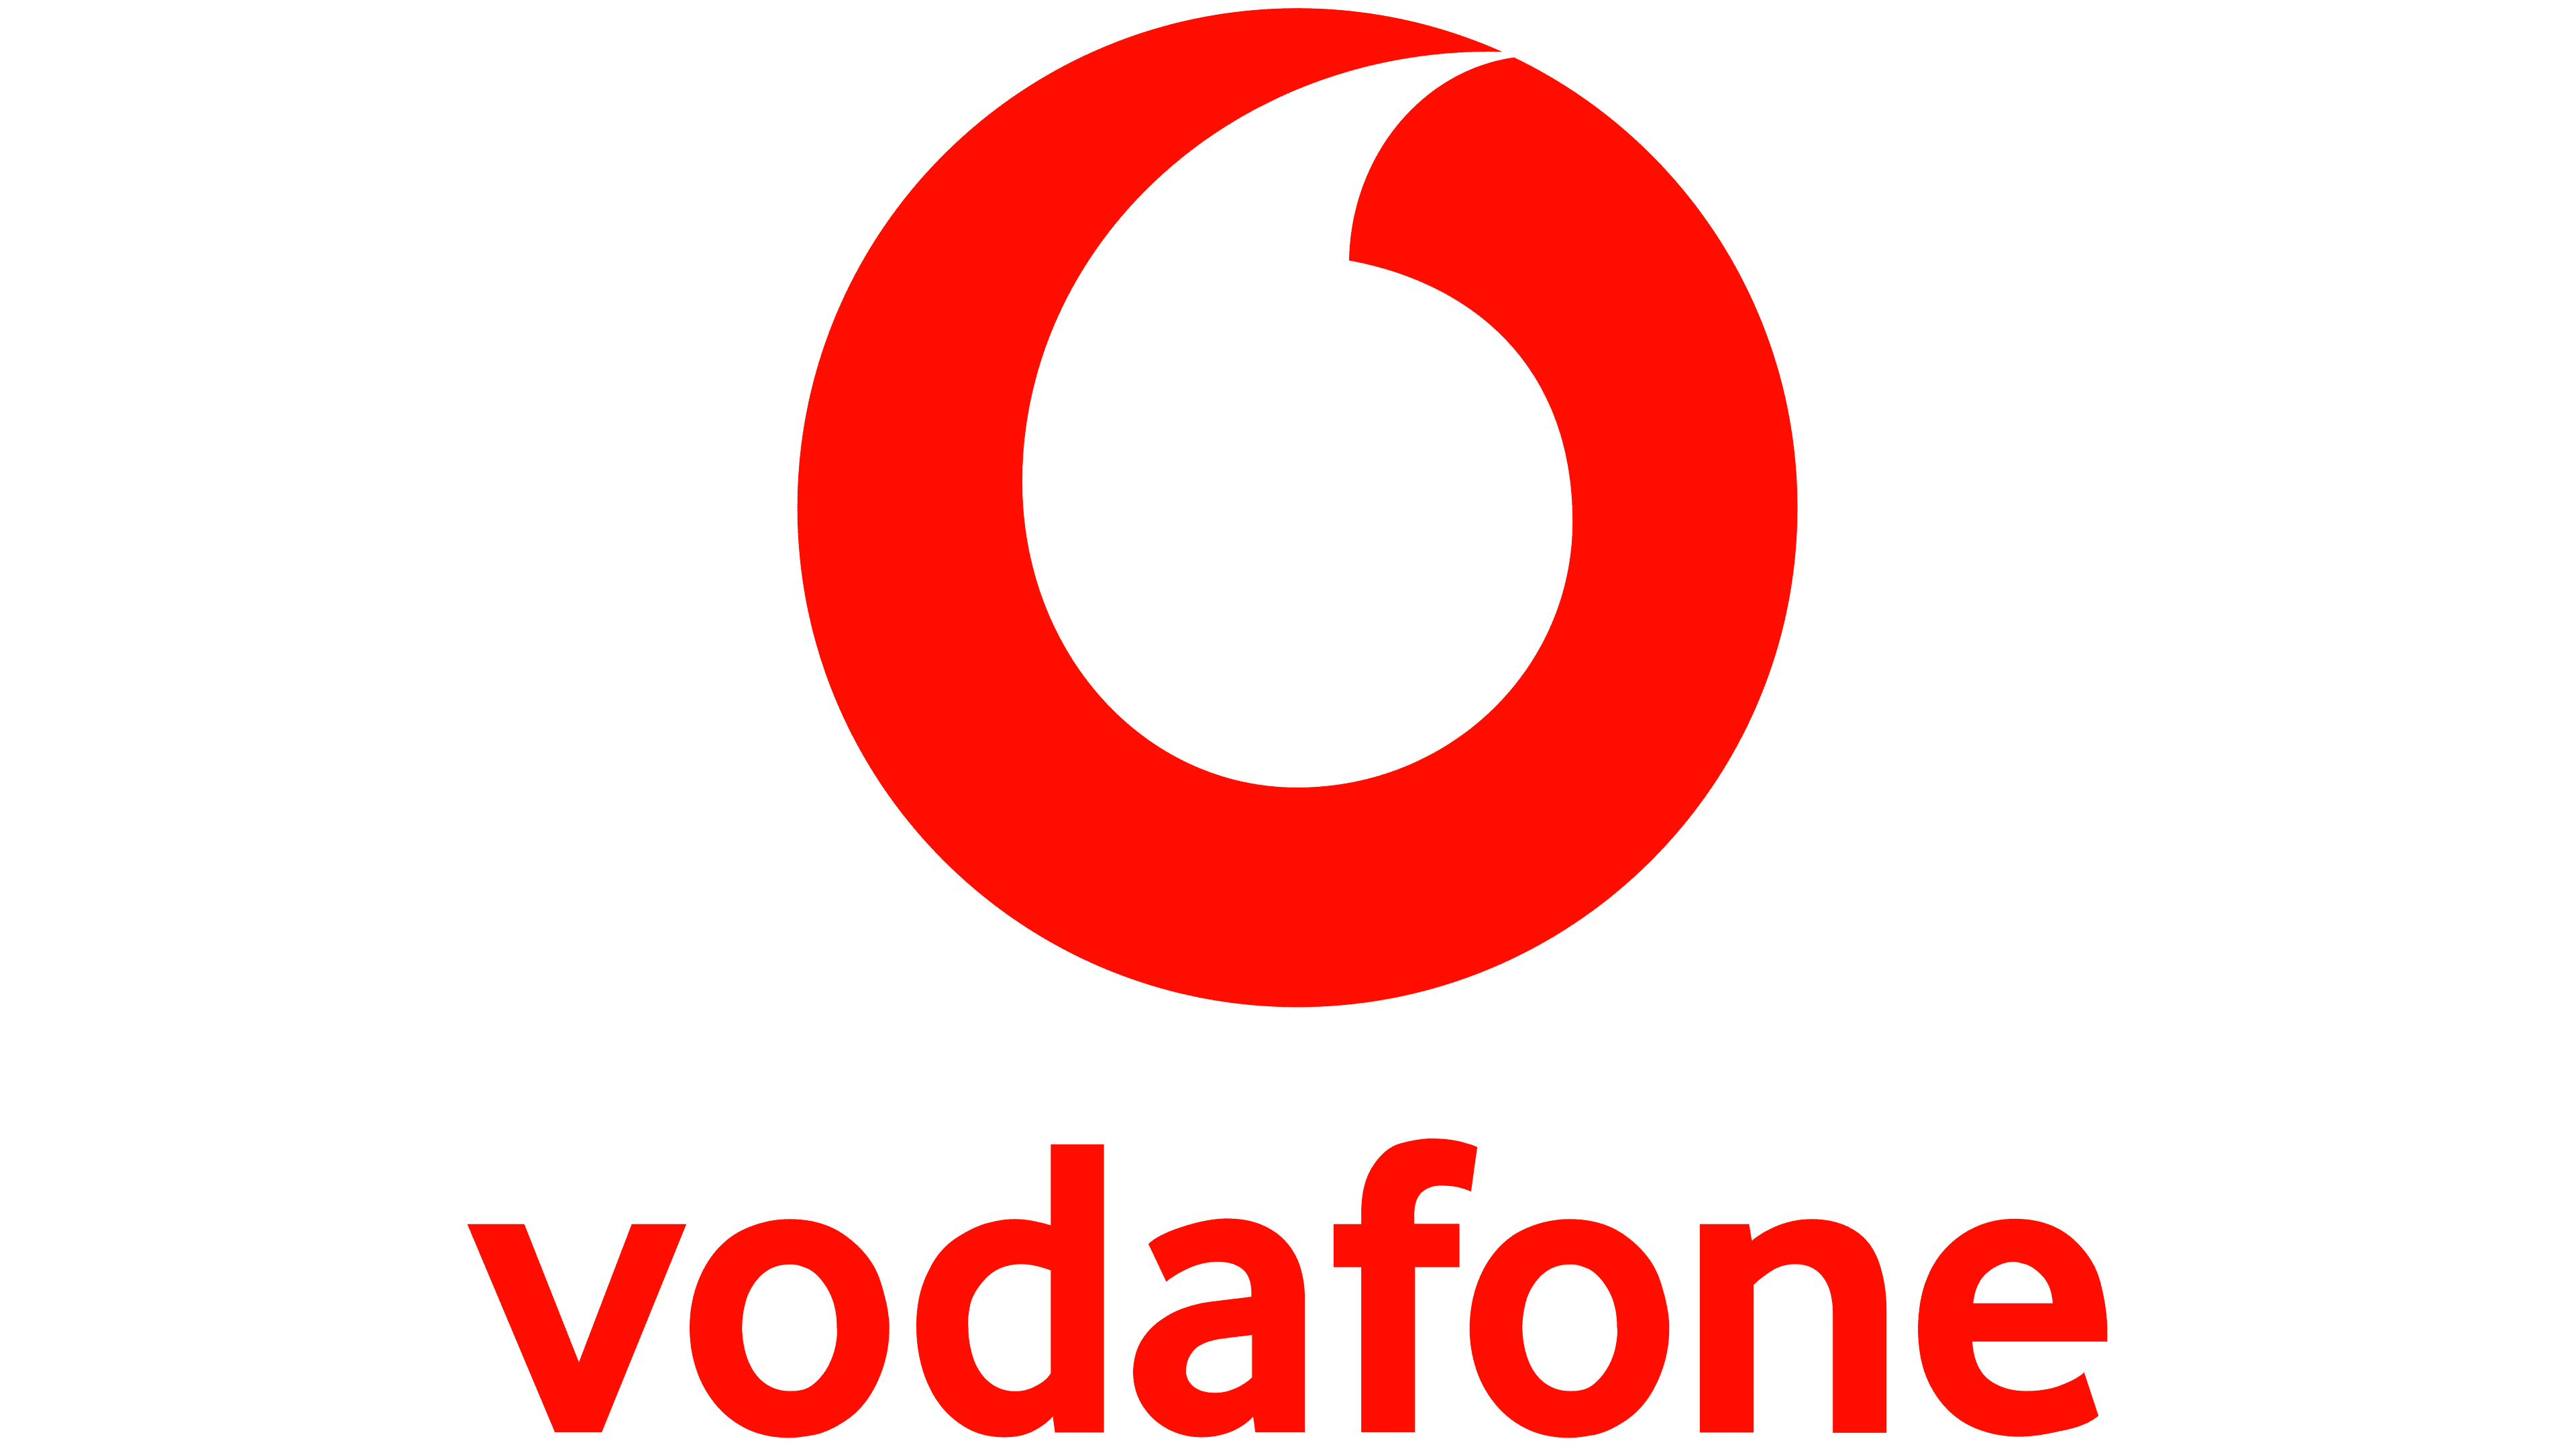 Get Vodafone's Fibre 2 broadband for £25 a month + receive a £110 gift card